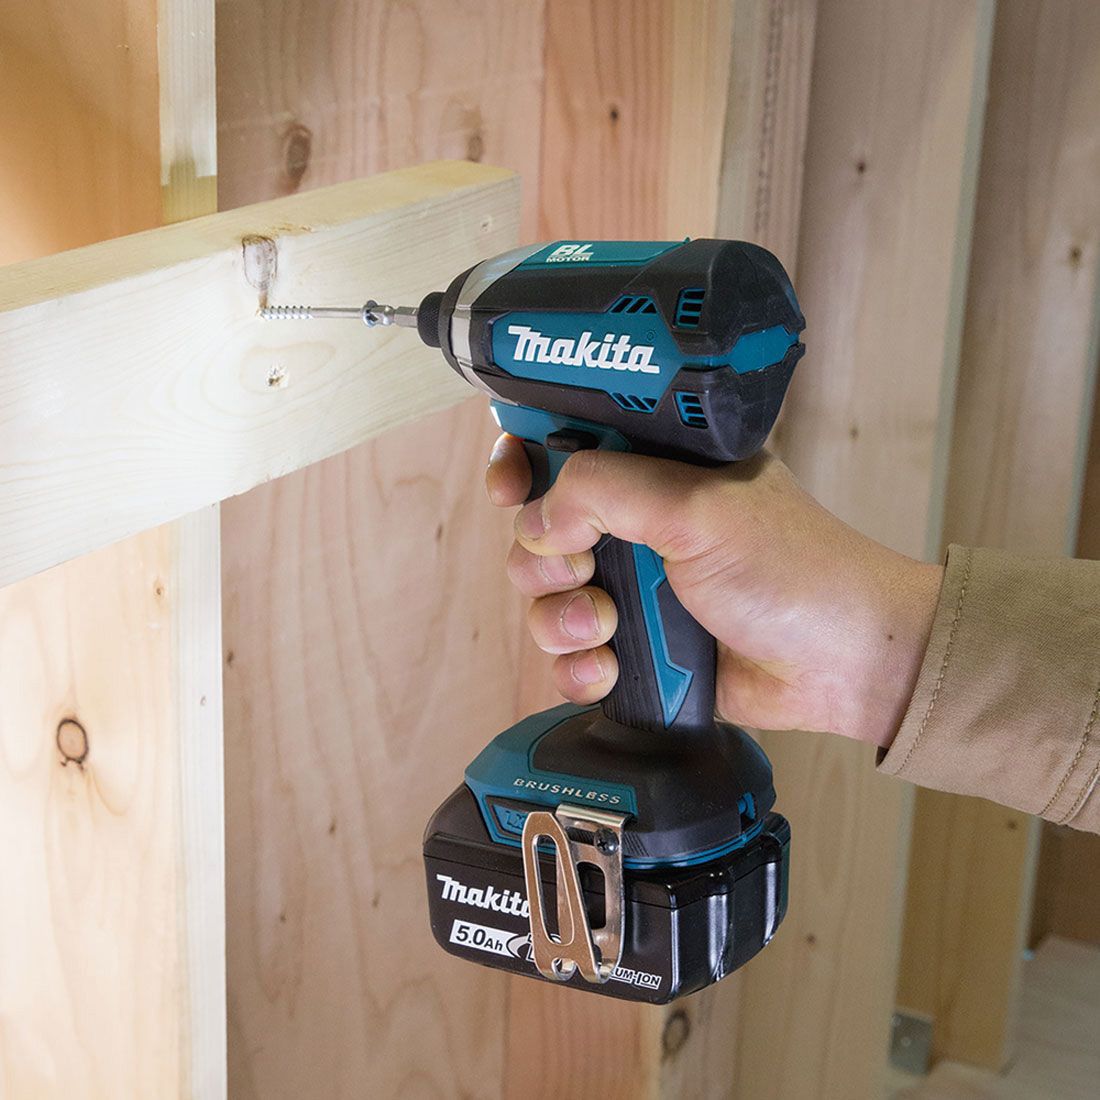 Makita DLX2507TJ 18V Brushless Twin Pack Combi Drill & Impact Driver With 2 x 5.0Ah Batteries Charger & Case